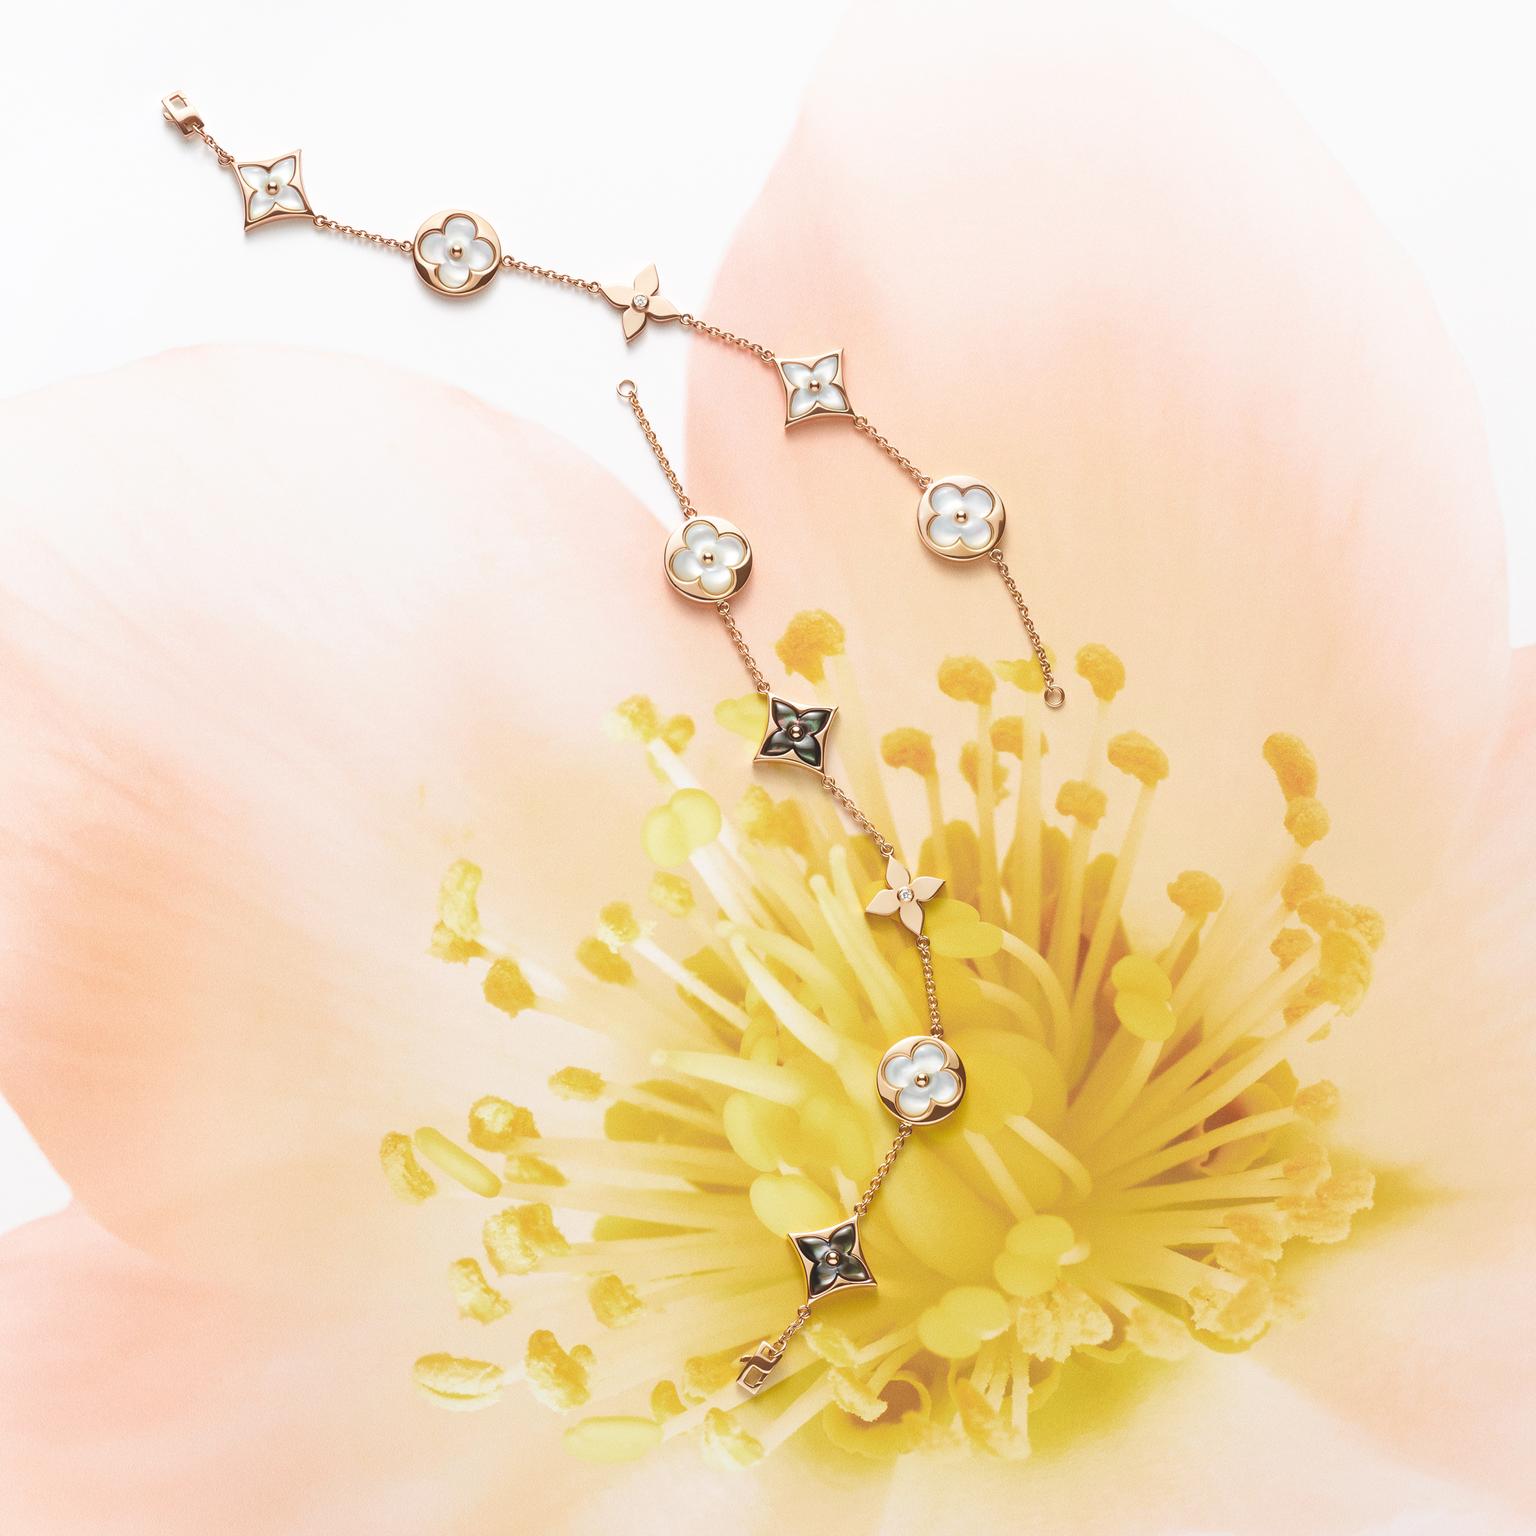 Blossom mother-of-pearl bracelet | Louis Vuitton | The Jewellery Editor